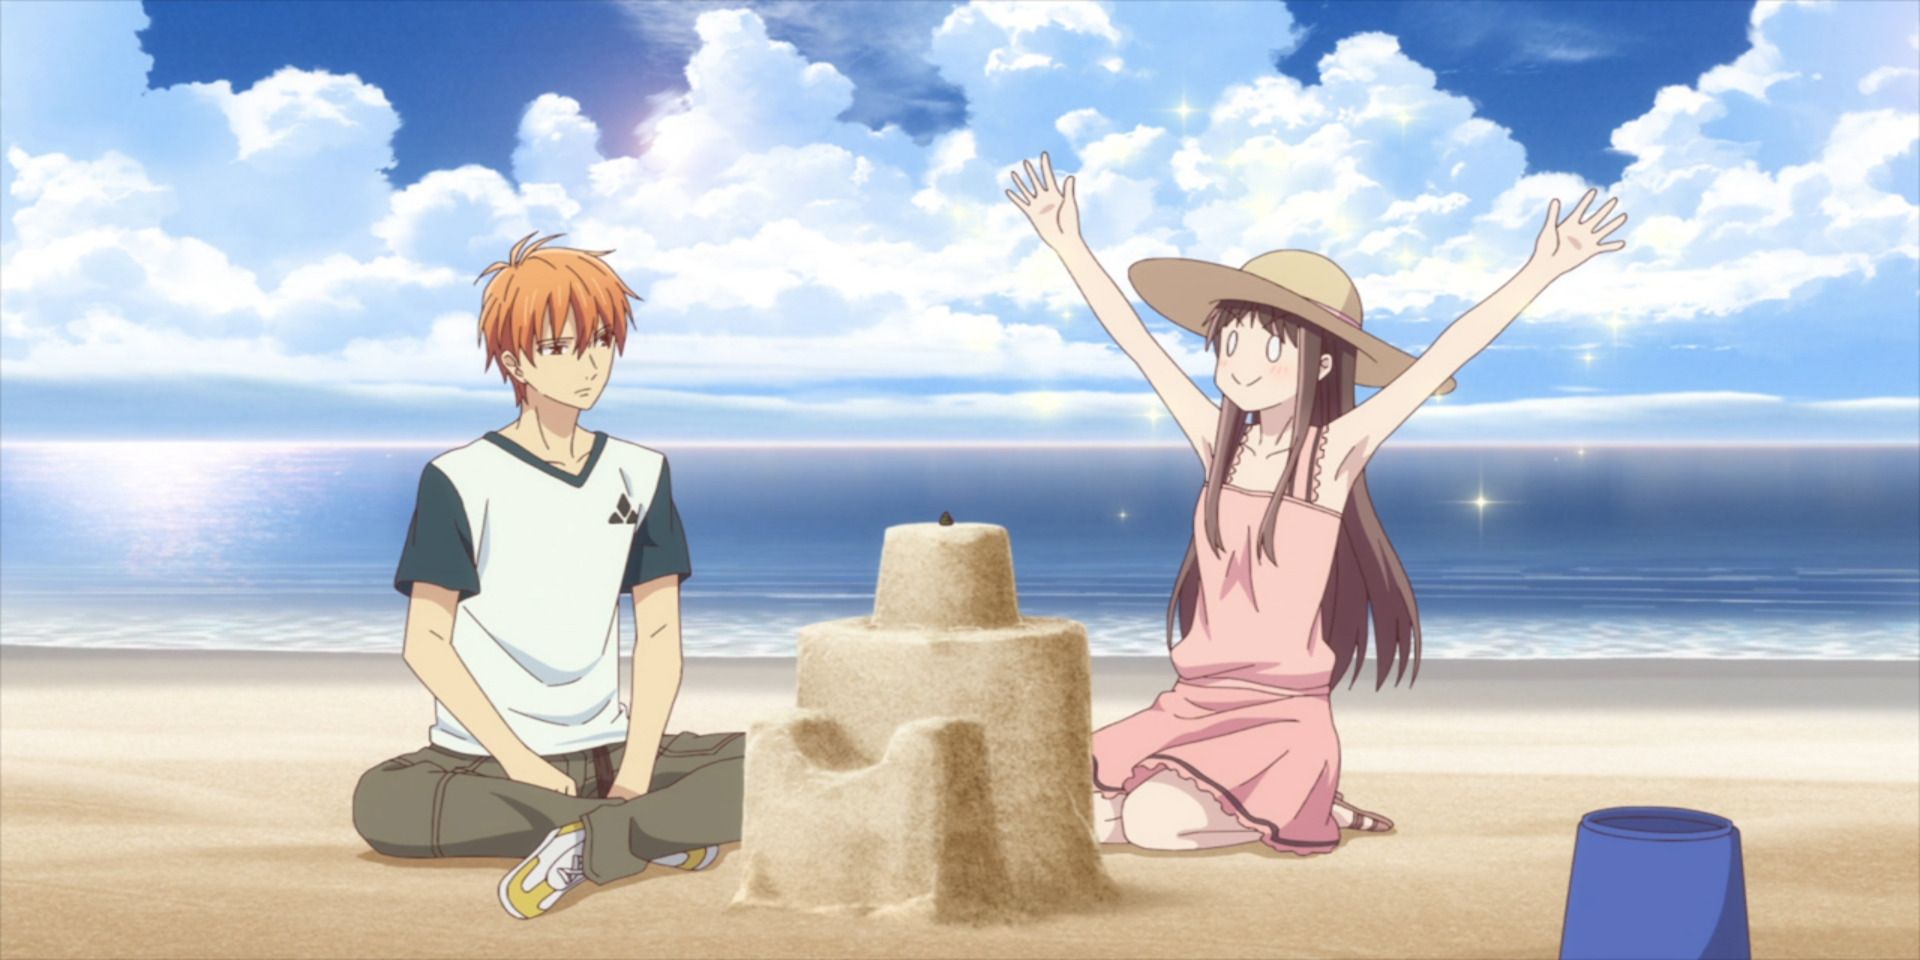 Tohru and Kyo build a sandcastle in Fruits Basket at the beach.